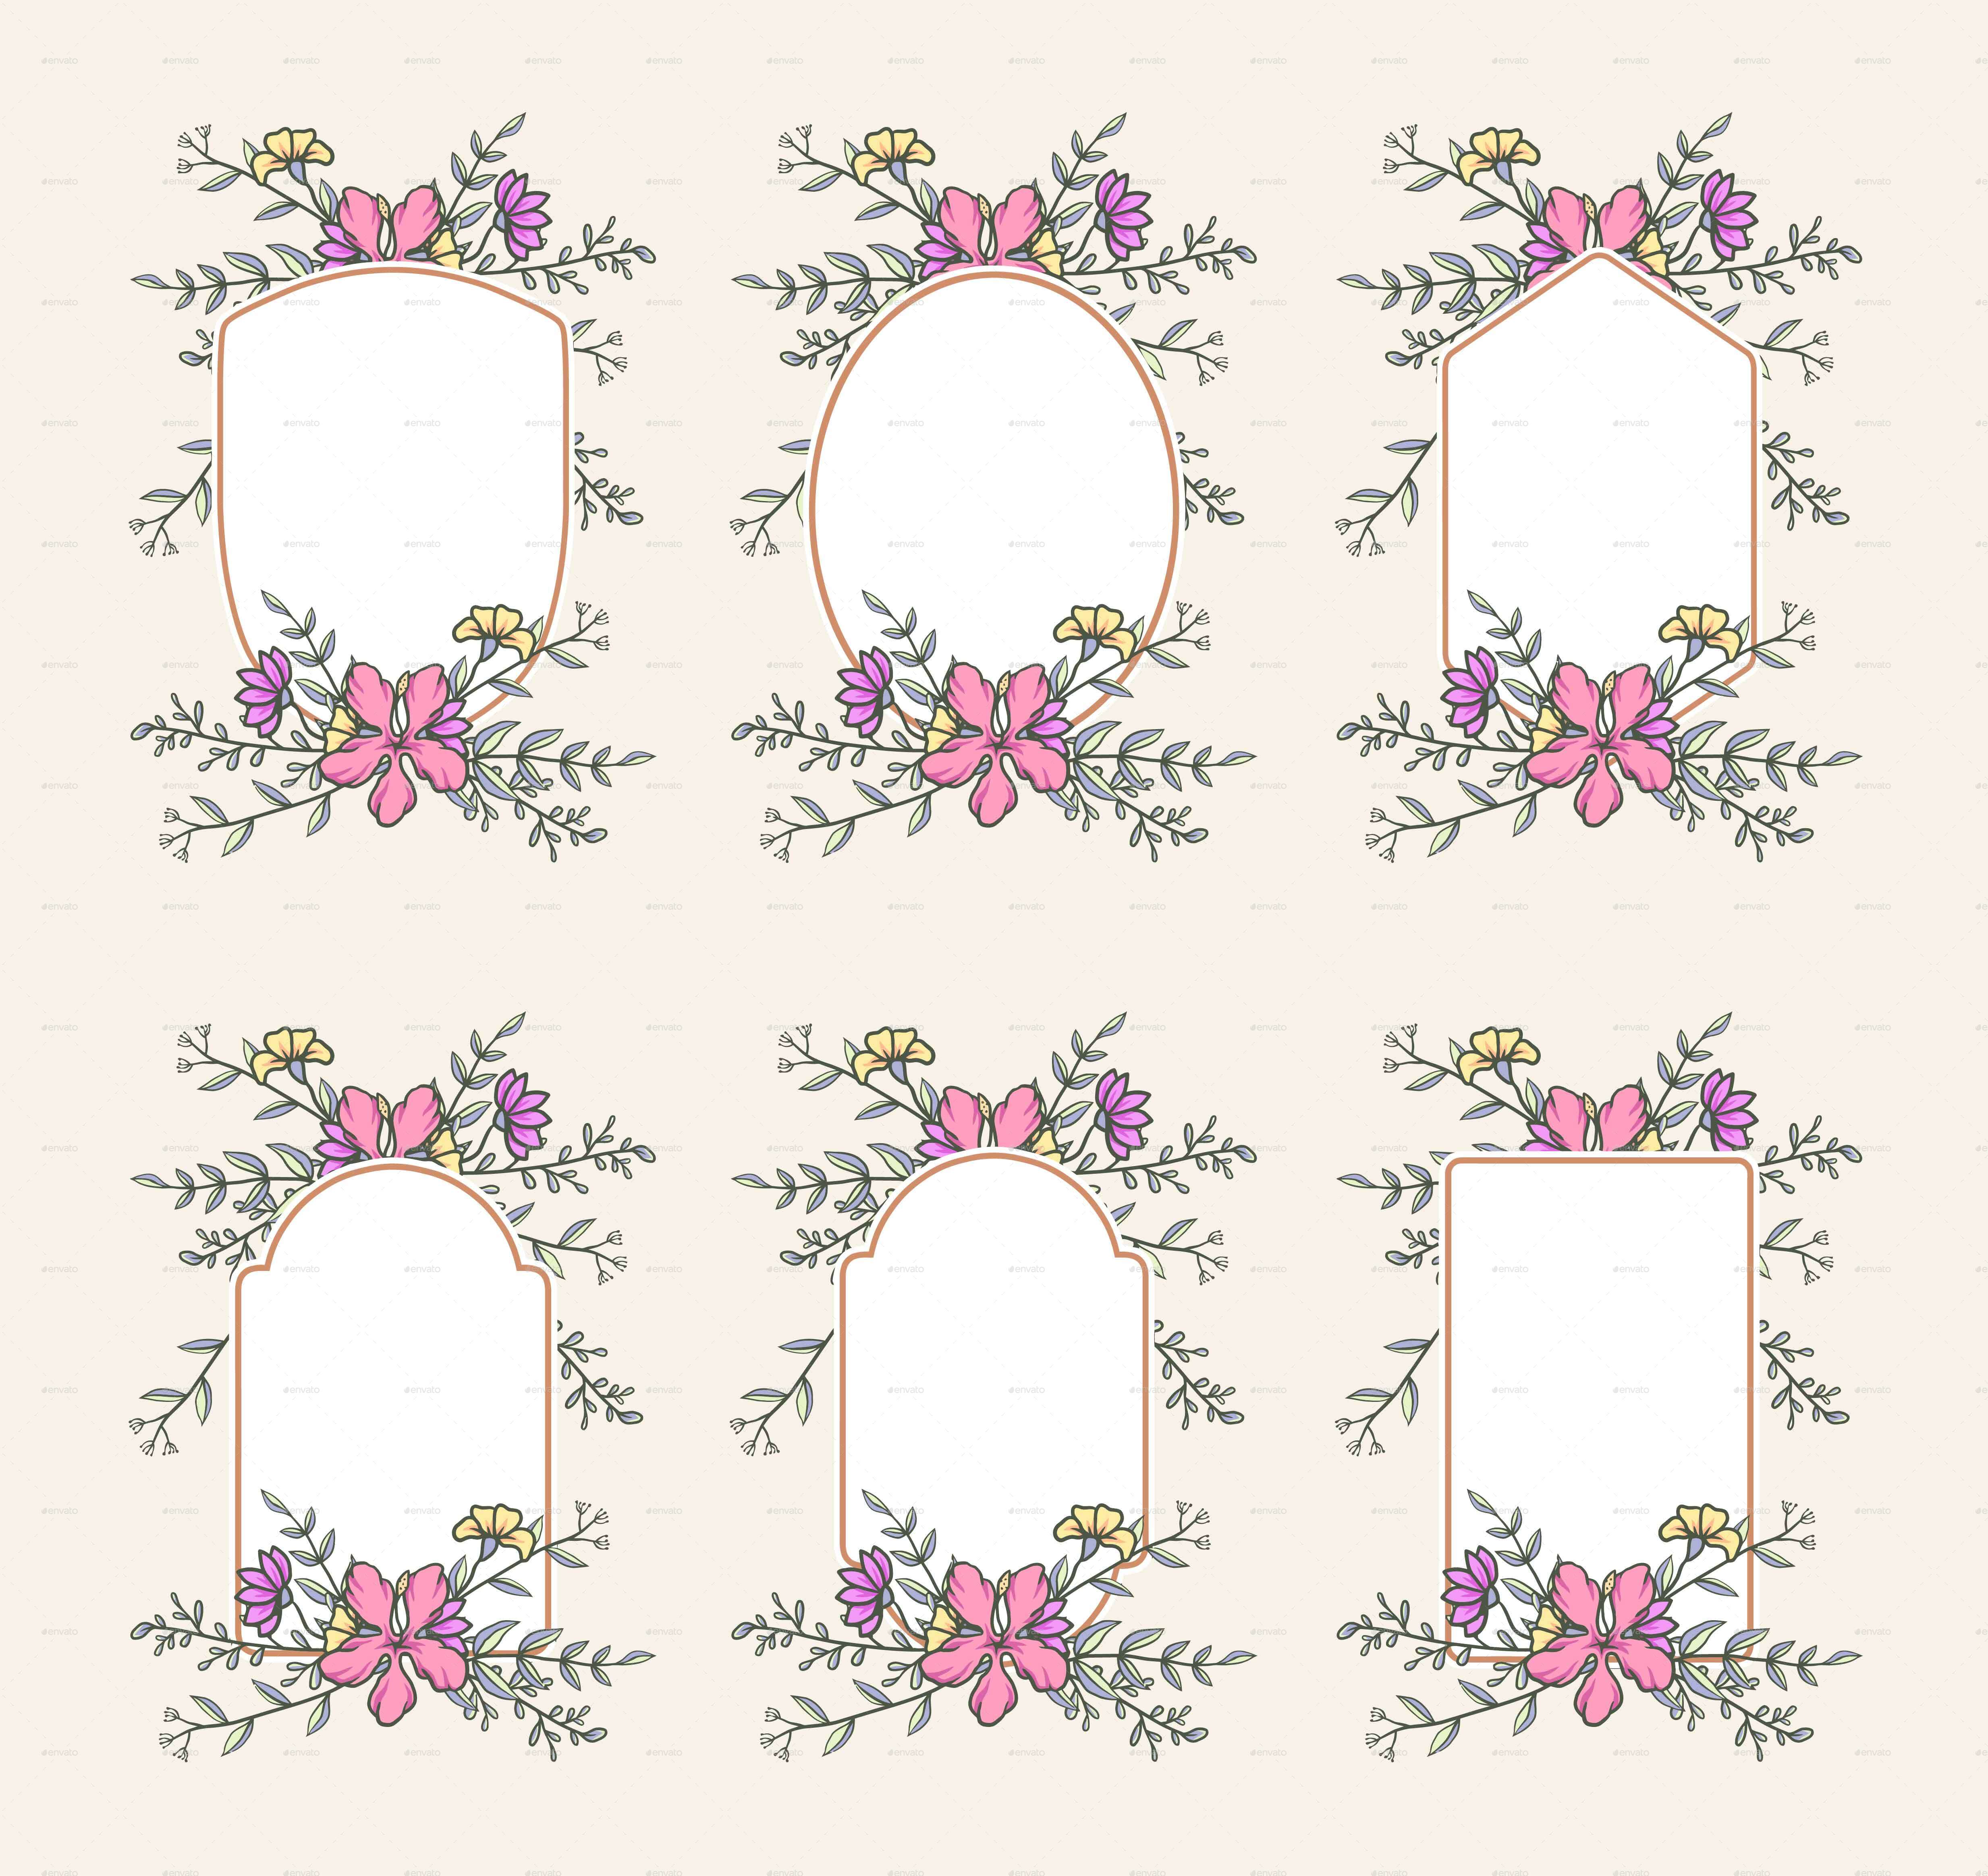 Floral Frame Collection by Amillustrated | GraphicRiver